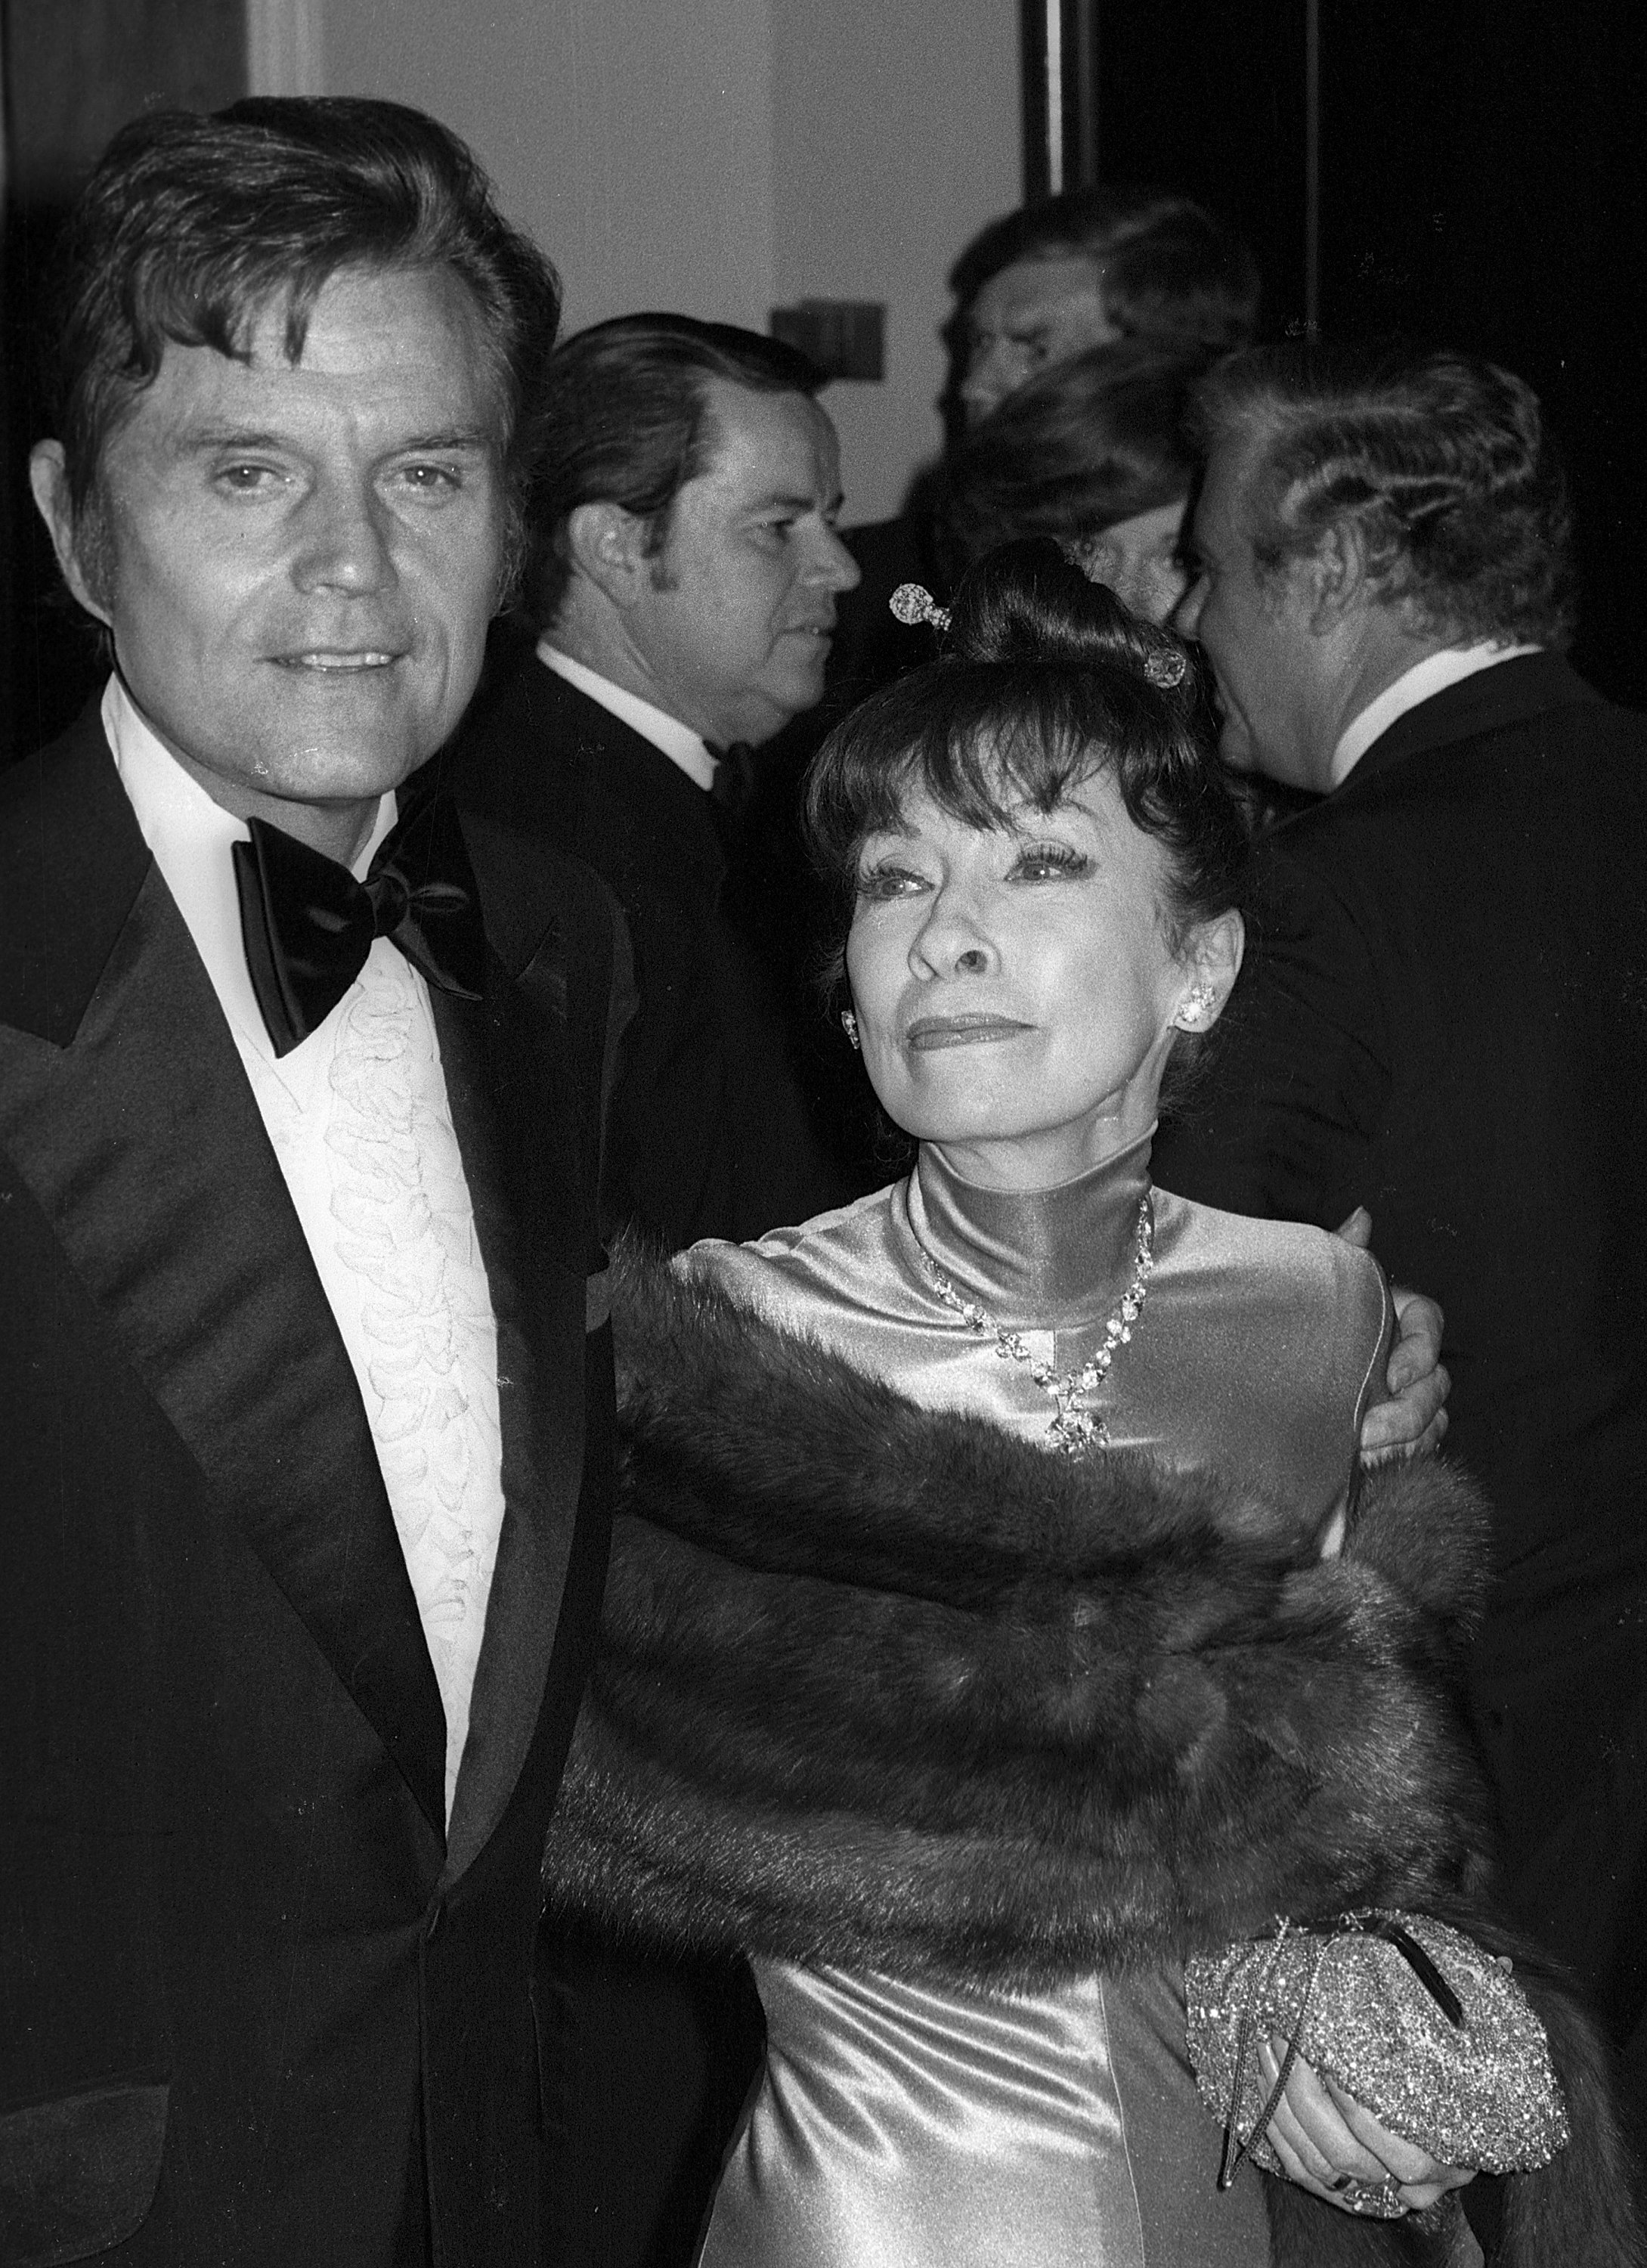 Actor Jack Lord and wife Marie attend the Eighth Annual American Film Institute (AFI) Lifetime Achievement Award Salute to James Stewart on February 28, 1980 at the Beverly Hilton Hotel in Beverly Hills, California. | Source: Getty Images